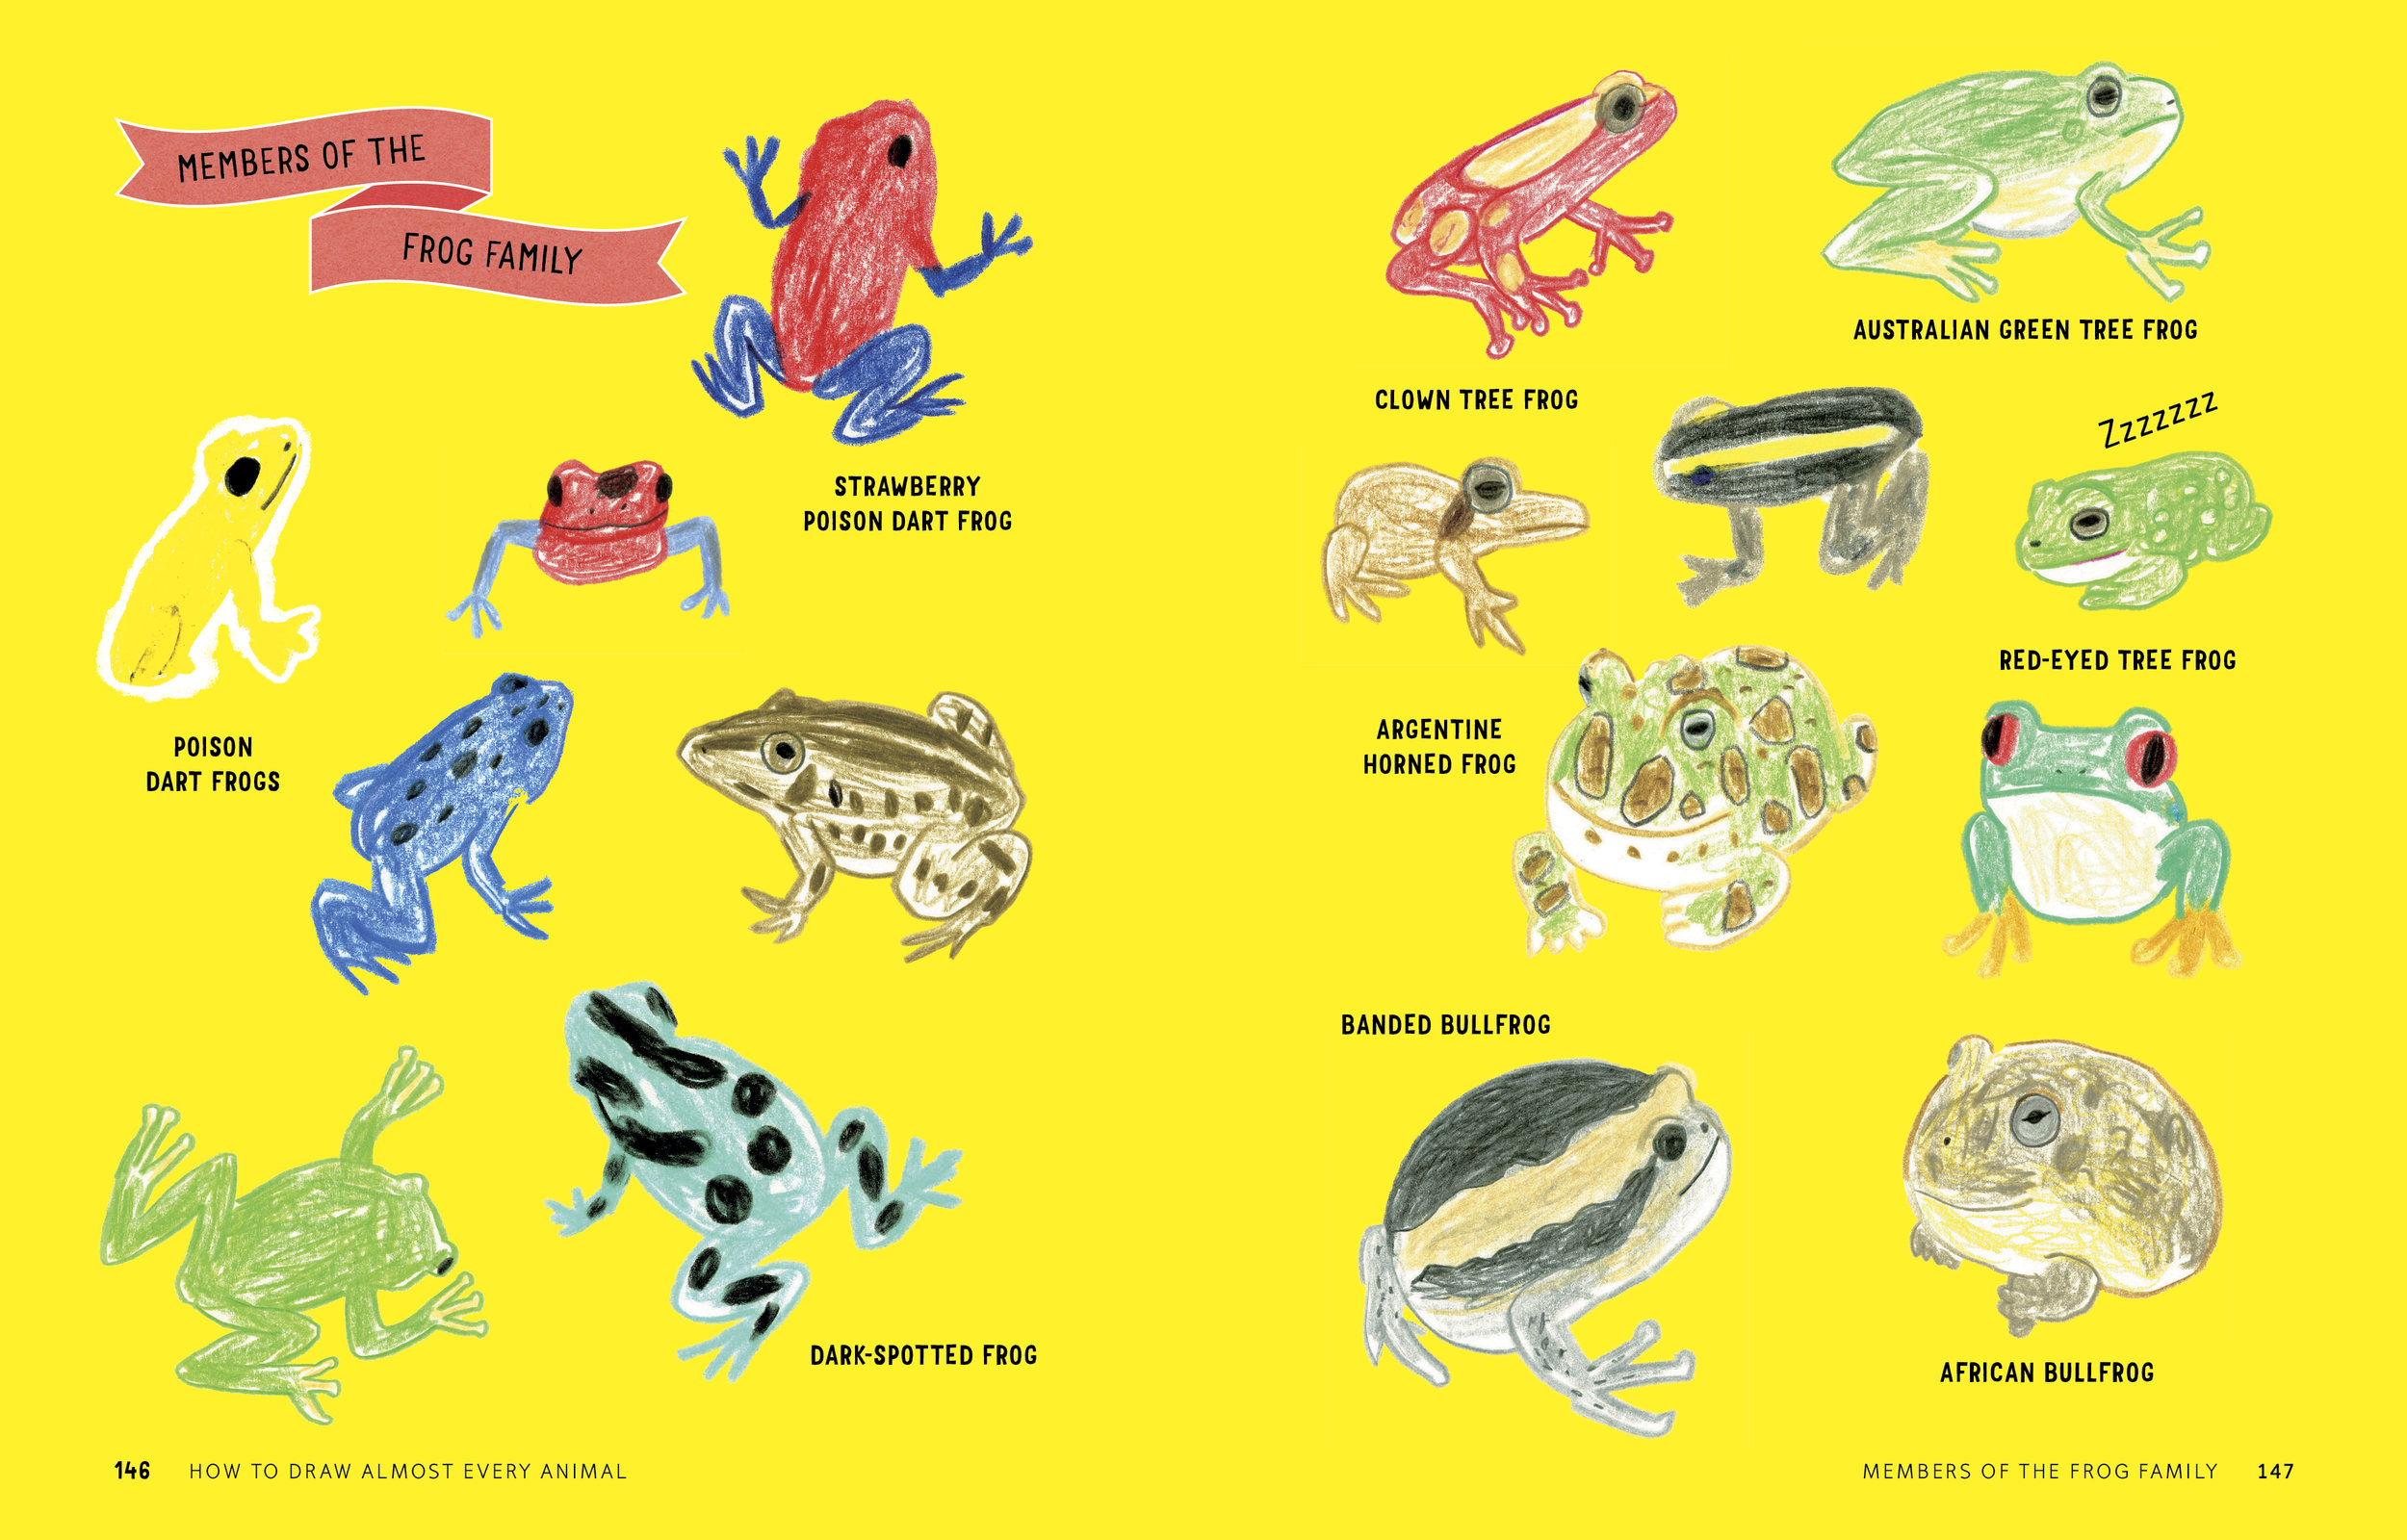 How to Draw Almost Every Animal 146.147.jpg